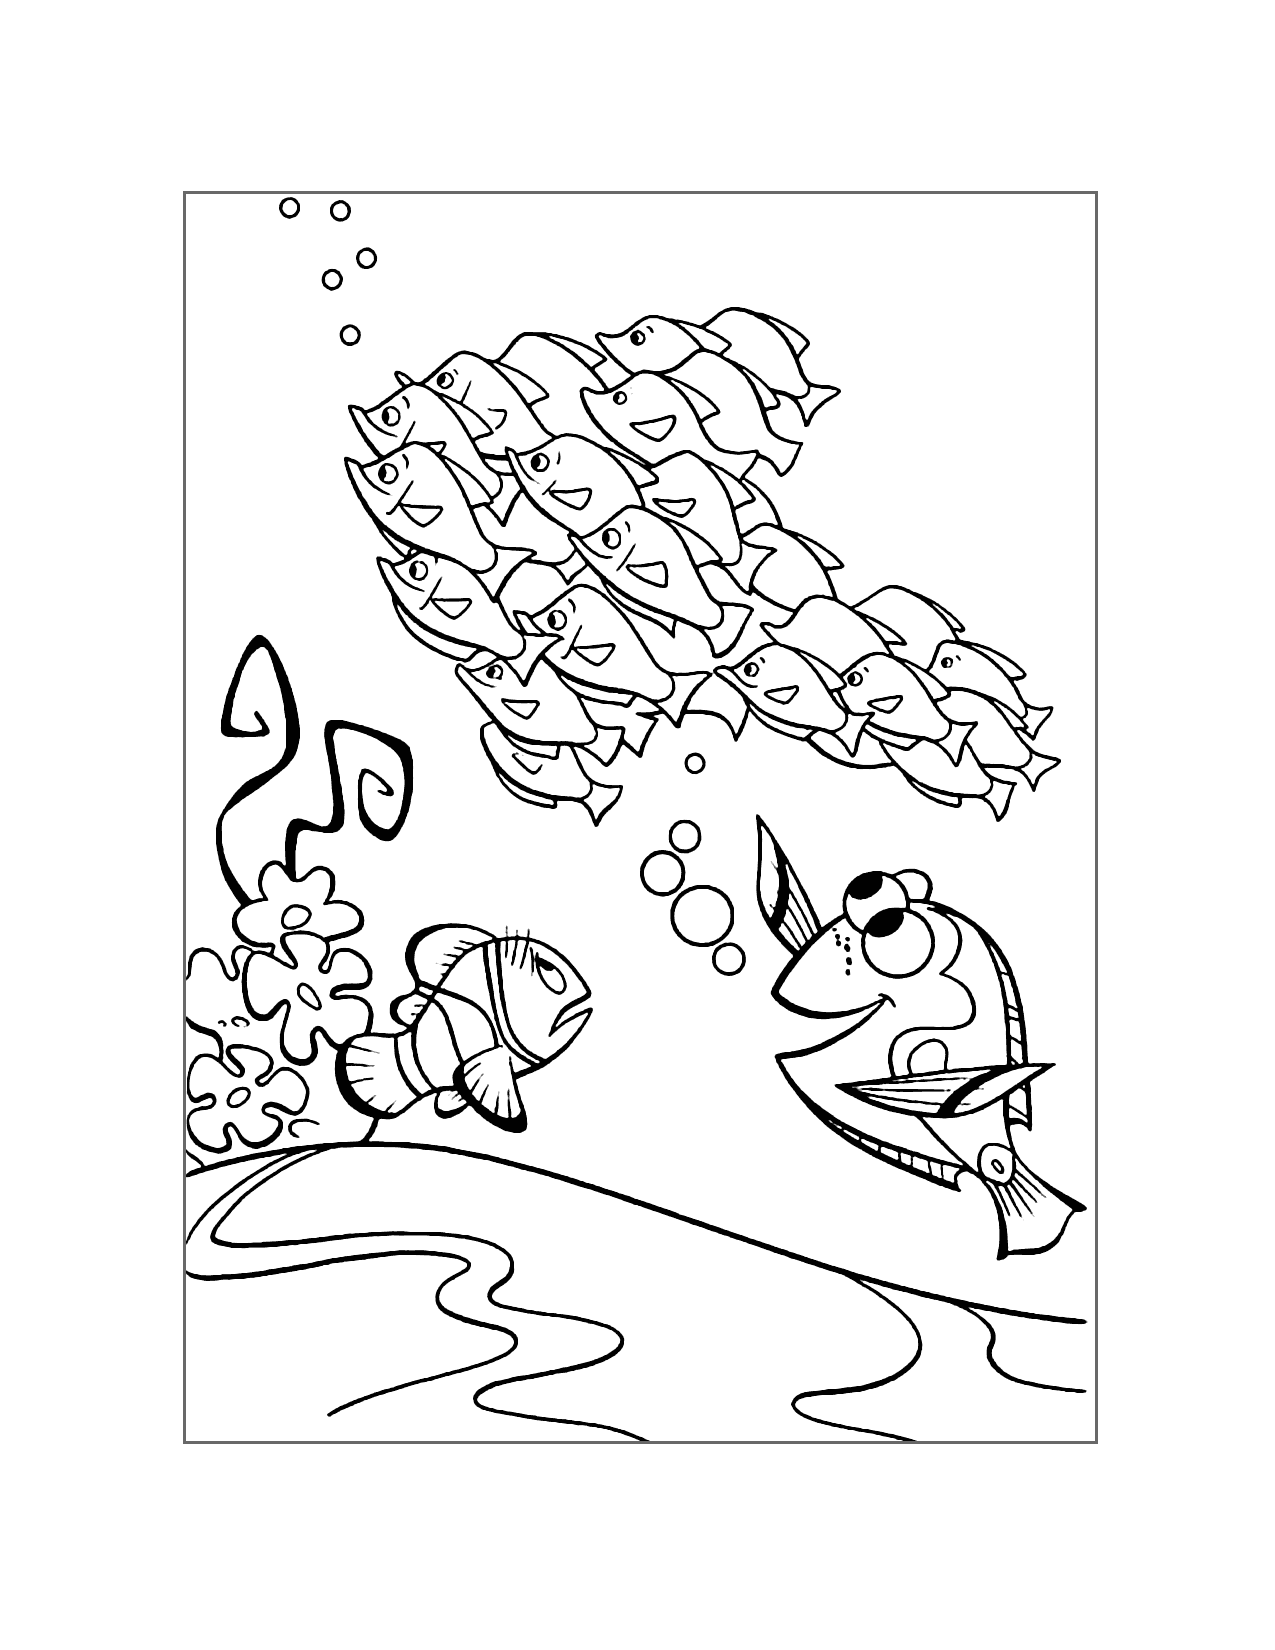 Finding Nemo School Of Fish Coloring Page